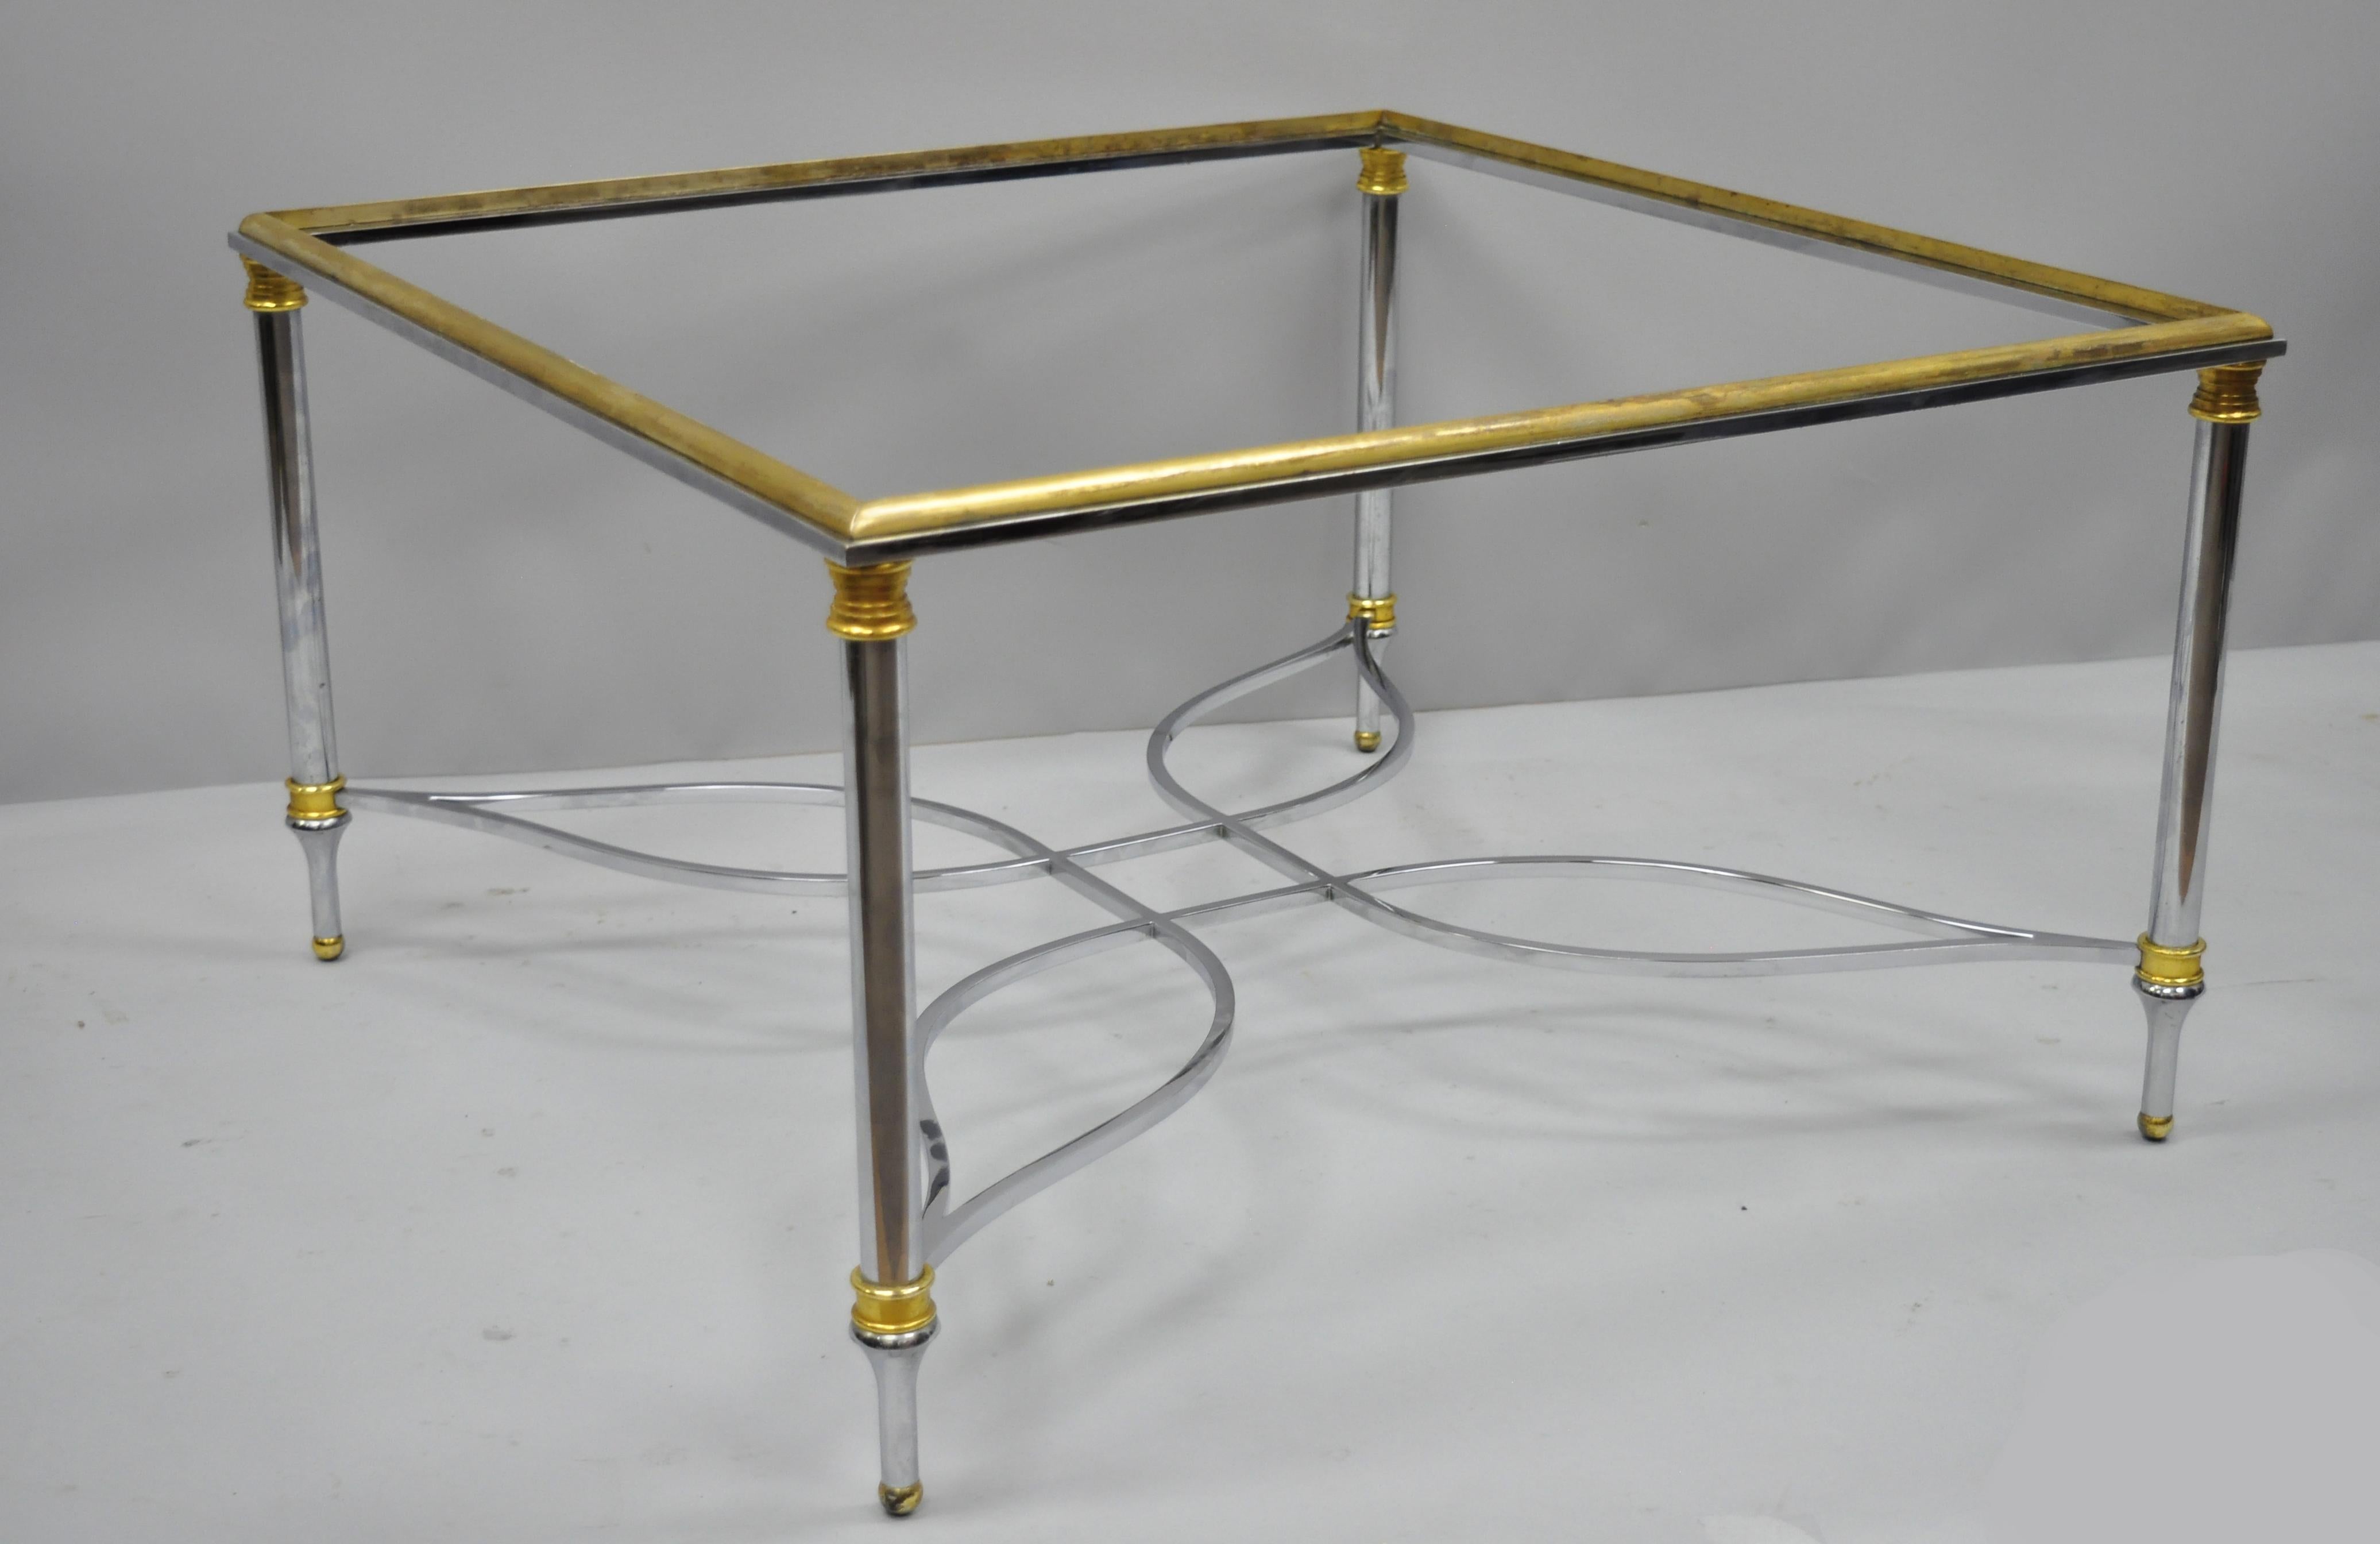 Maison Jansen style chrome steel and brass square coffee table base. Item features star form stretcher, brass rim and accents, tapered legs, and great style and form, circa 1960. Measurements: 17